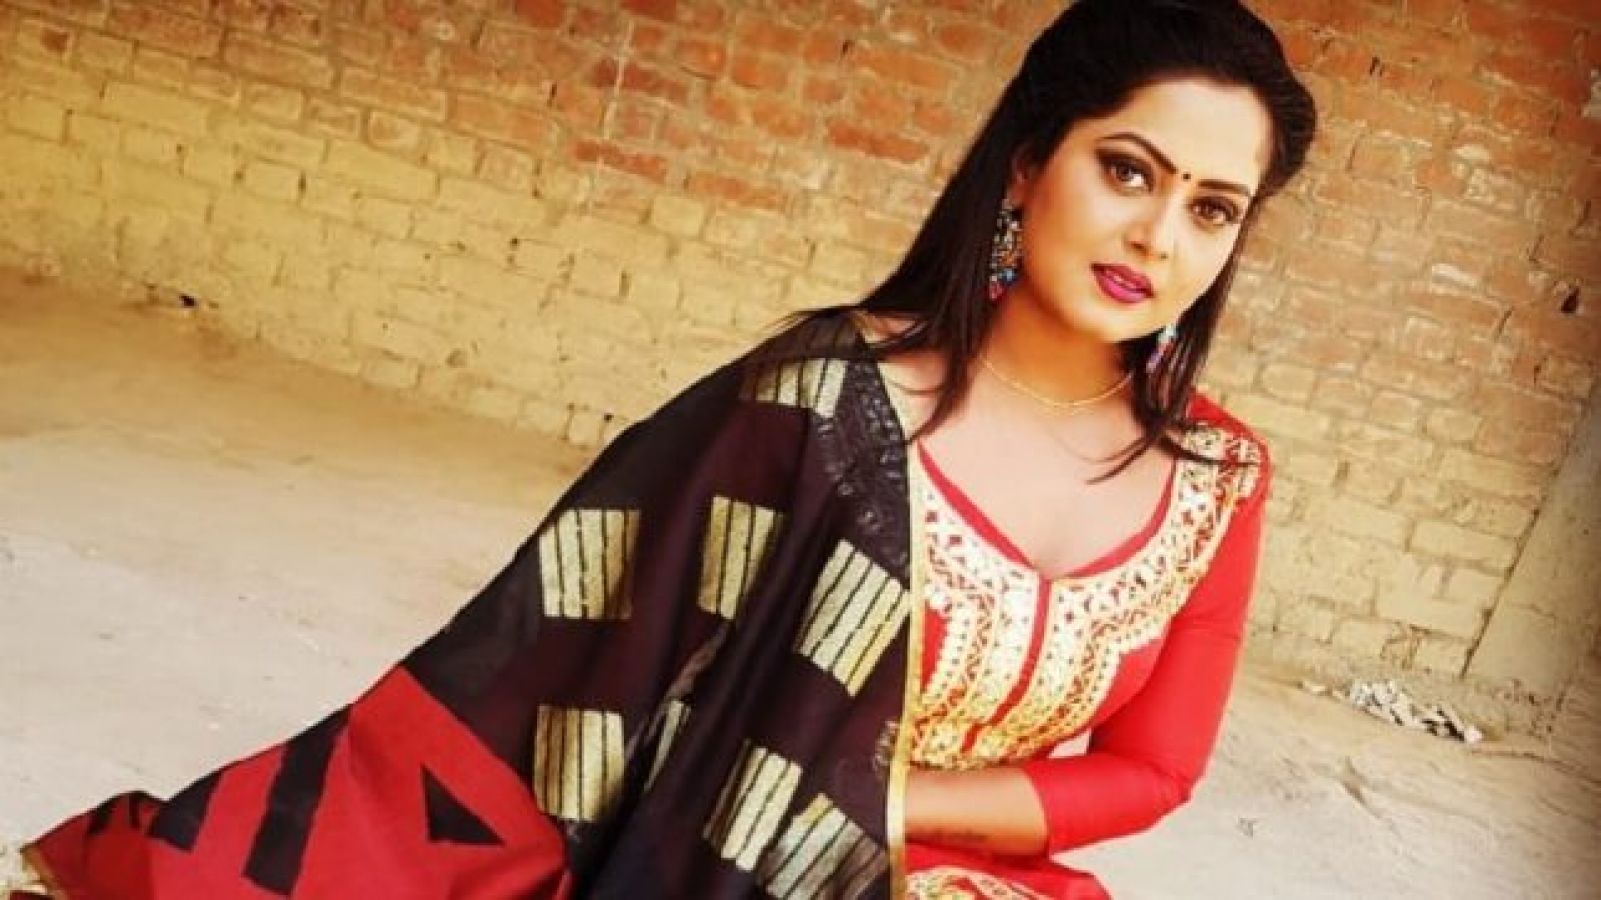 Anjana Singh X Video - Anjana Singh's intimate Scenes with This Bhojpuri Actor is the next trend,  See her Video Here! | NewsTrack English 1